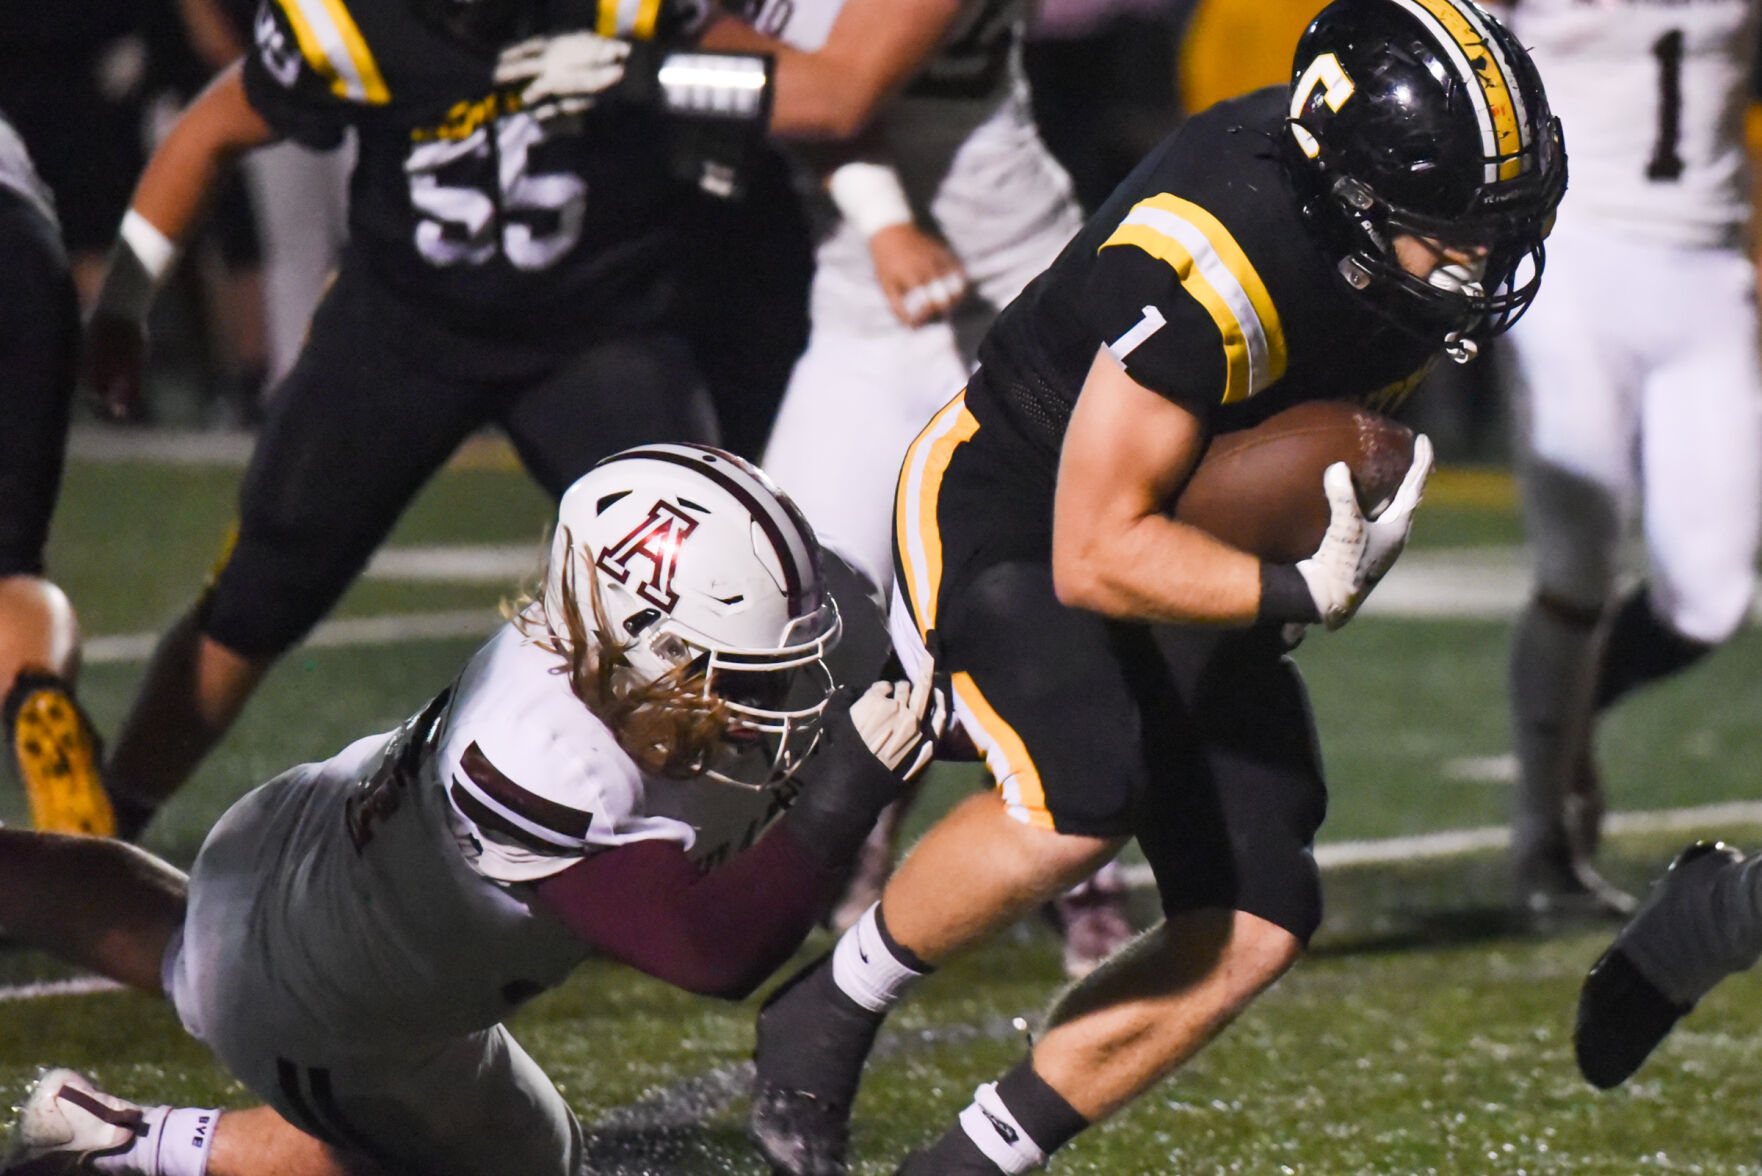 Johnson Central Claims Class 4A, District 6 Championship with Thrilling Victory over Ashland